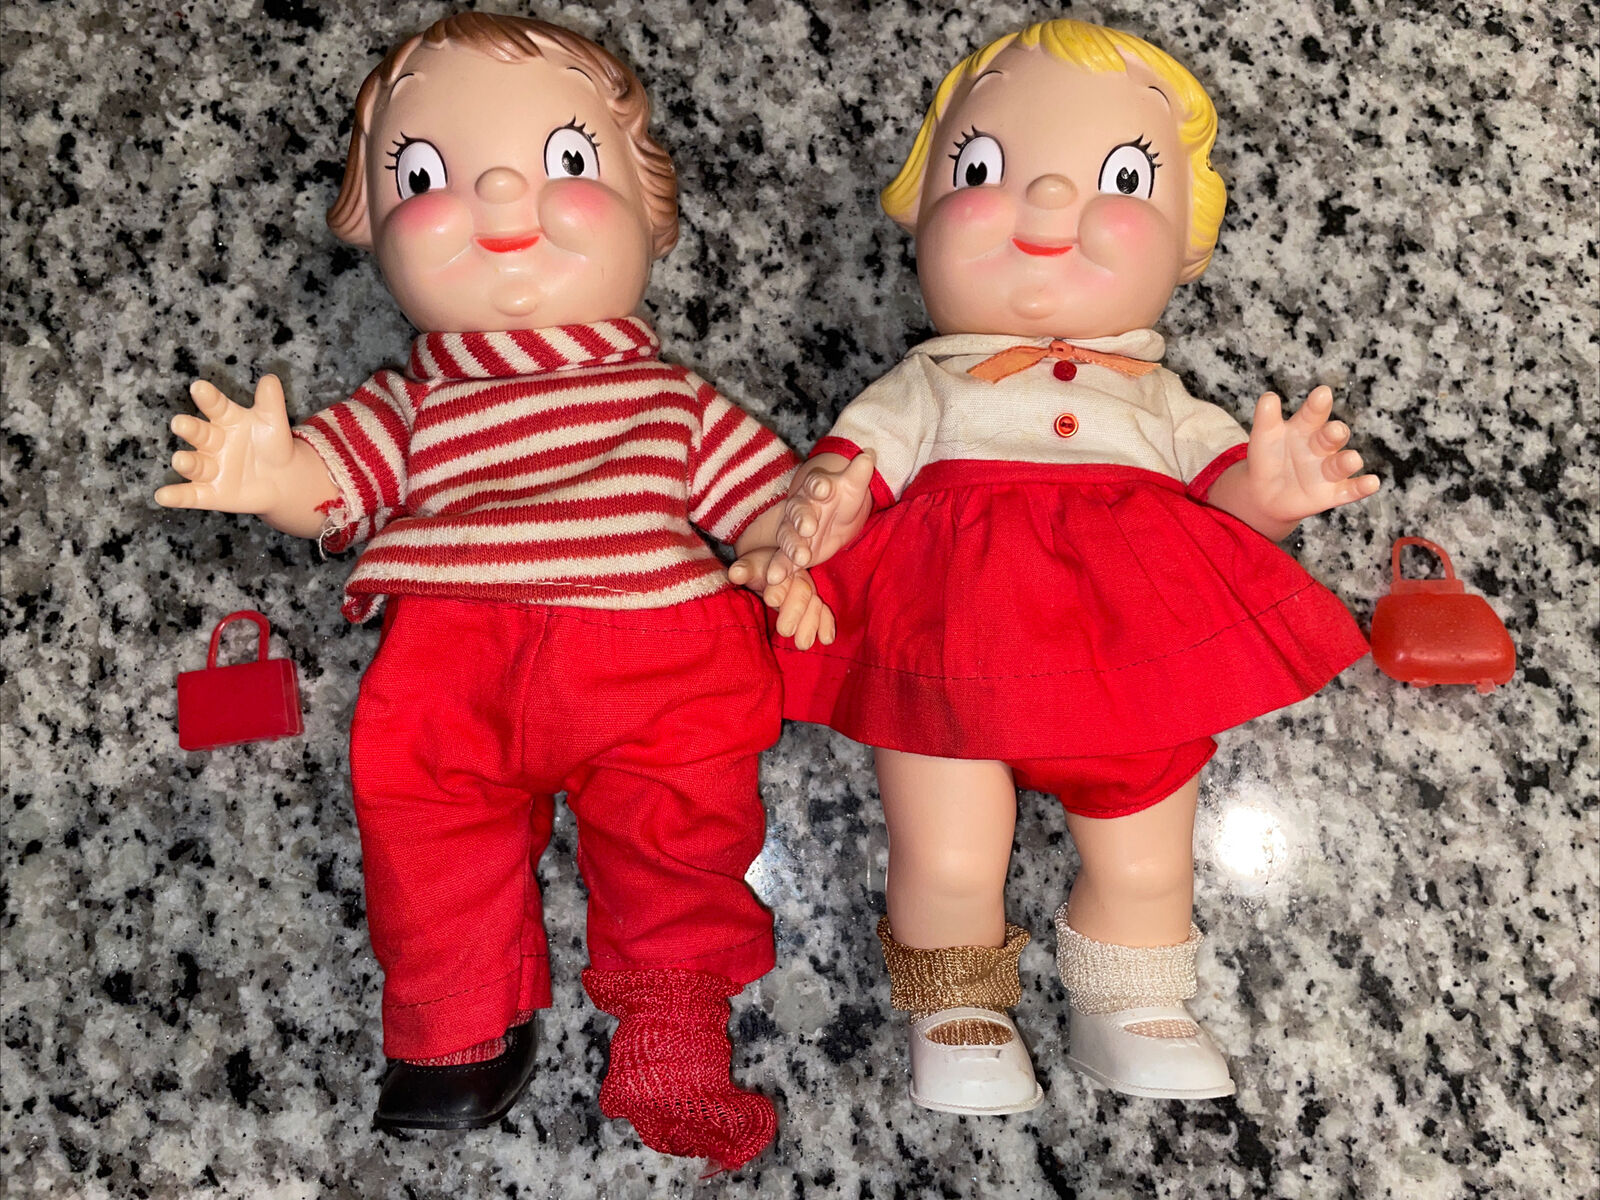 1970's VINTAGE RARE CAMPBELL'S SOUP KIDS 10-INCH DOLLS W/ Lunch Box (VG-Mint)